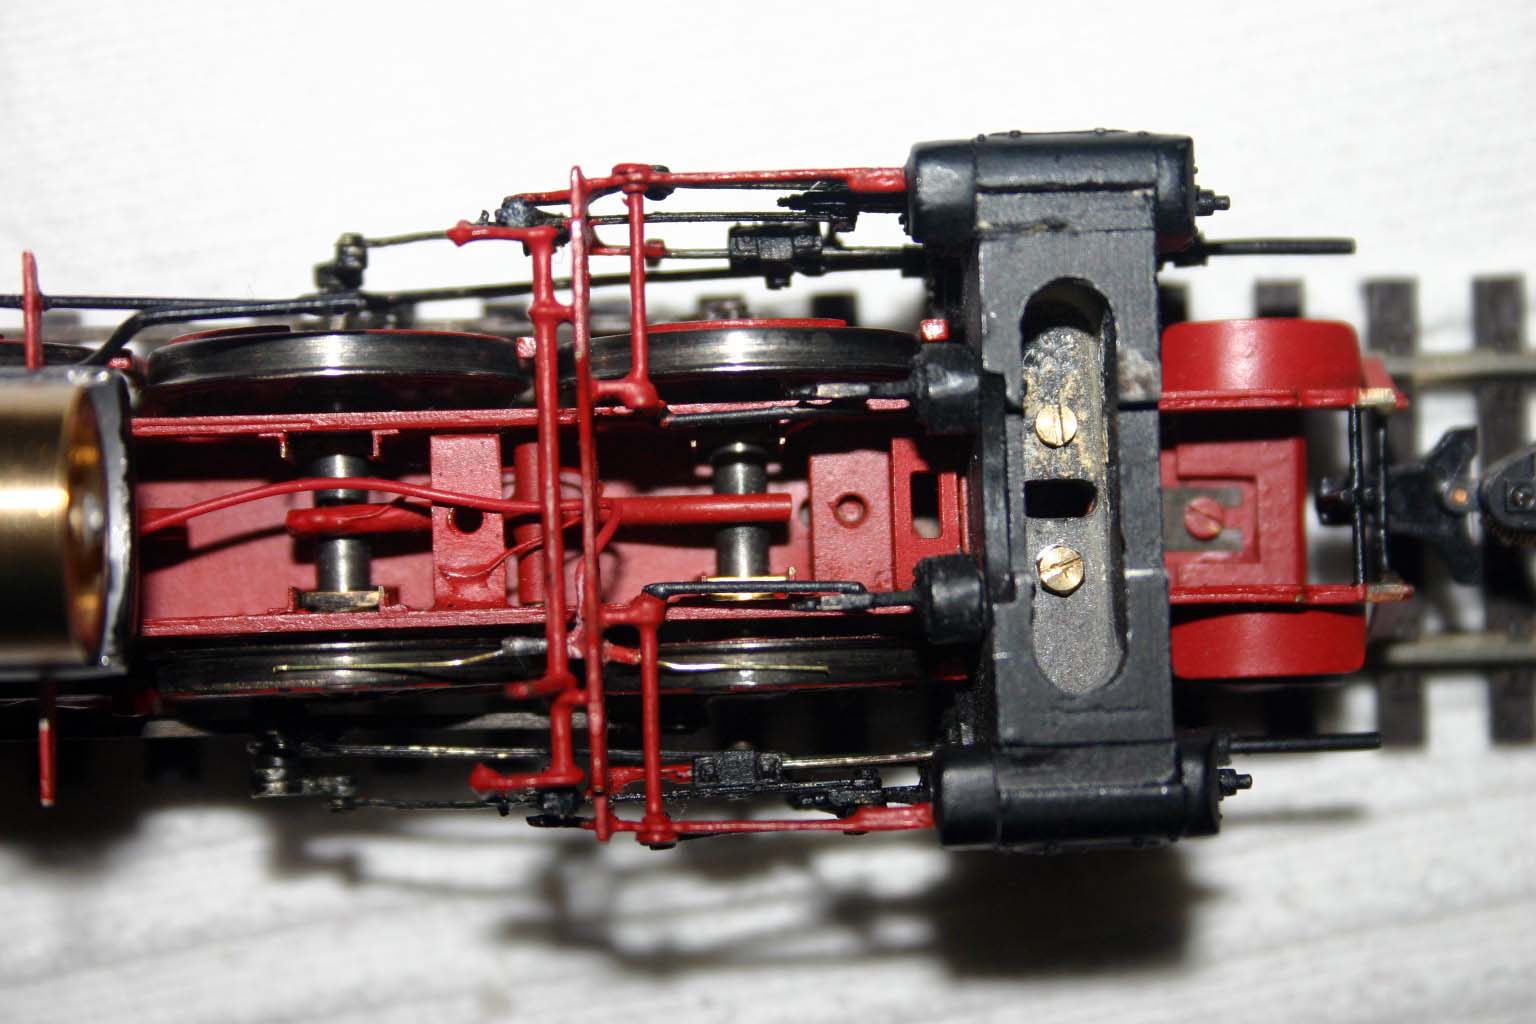 High close up view of the valvegear and compensation fitted to the BR19 model